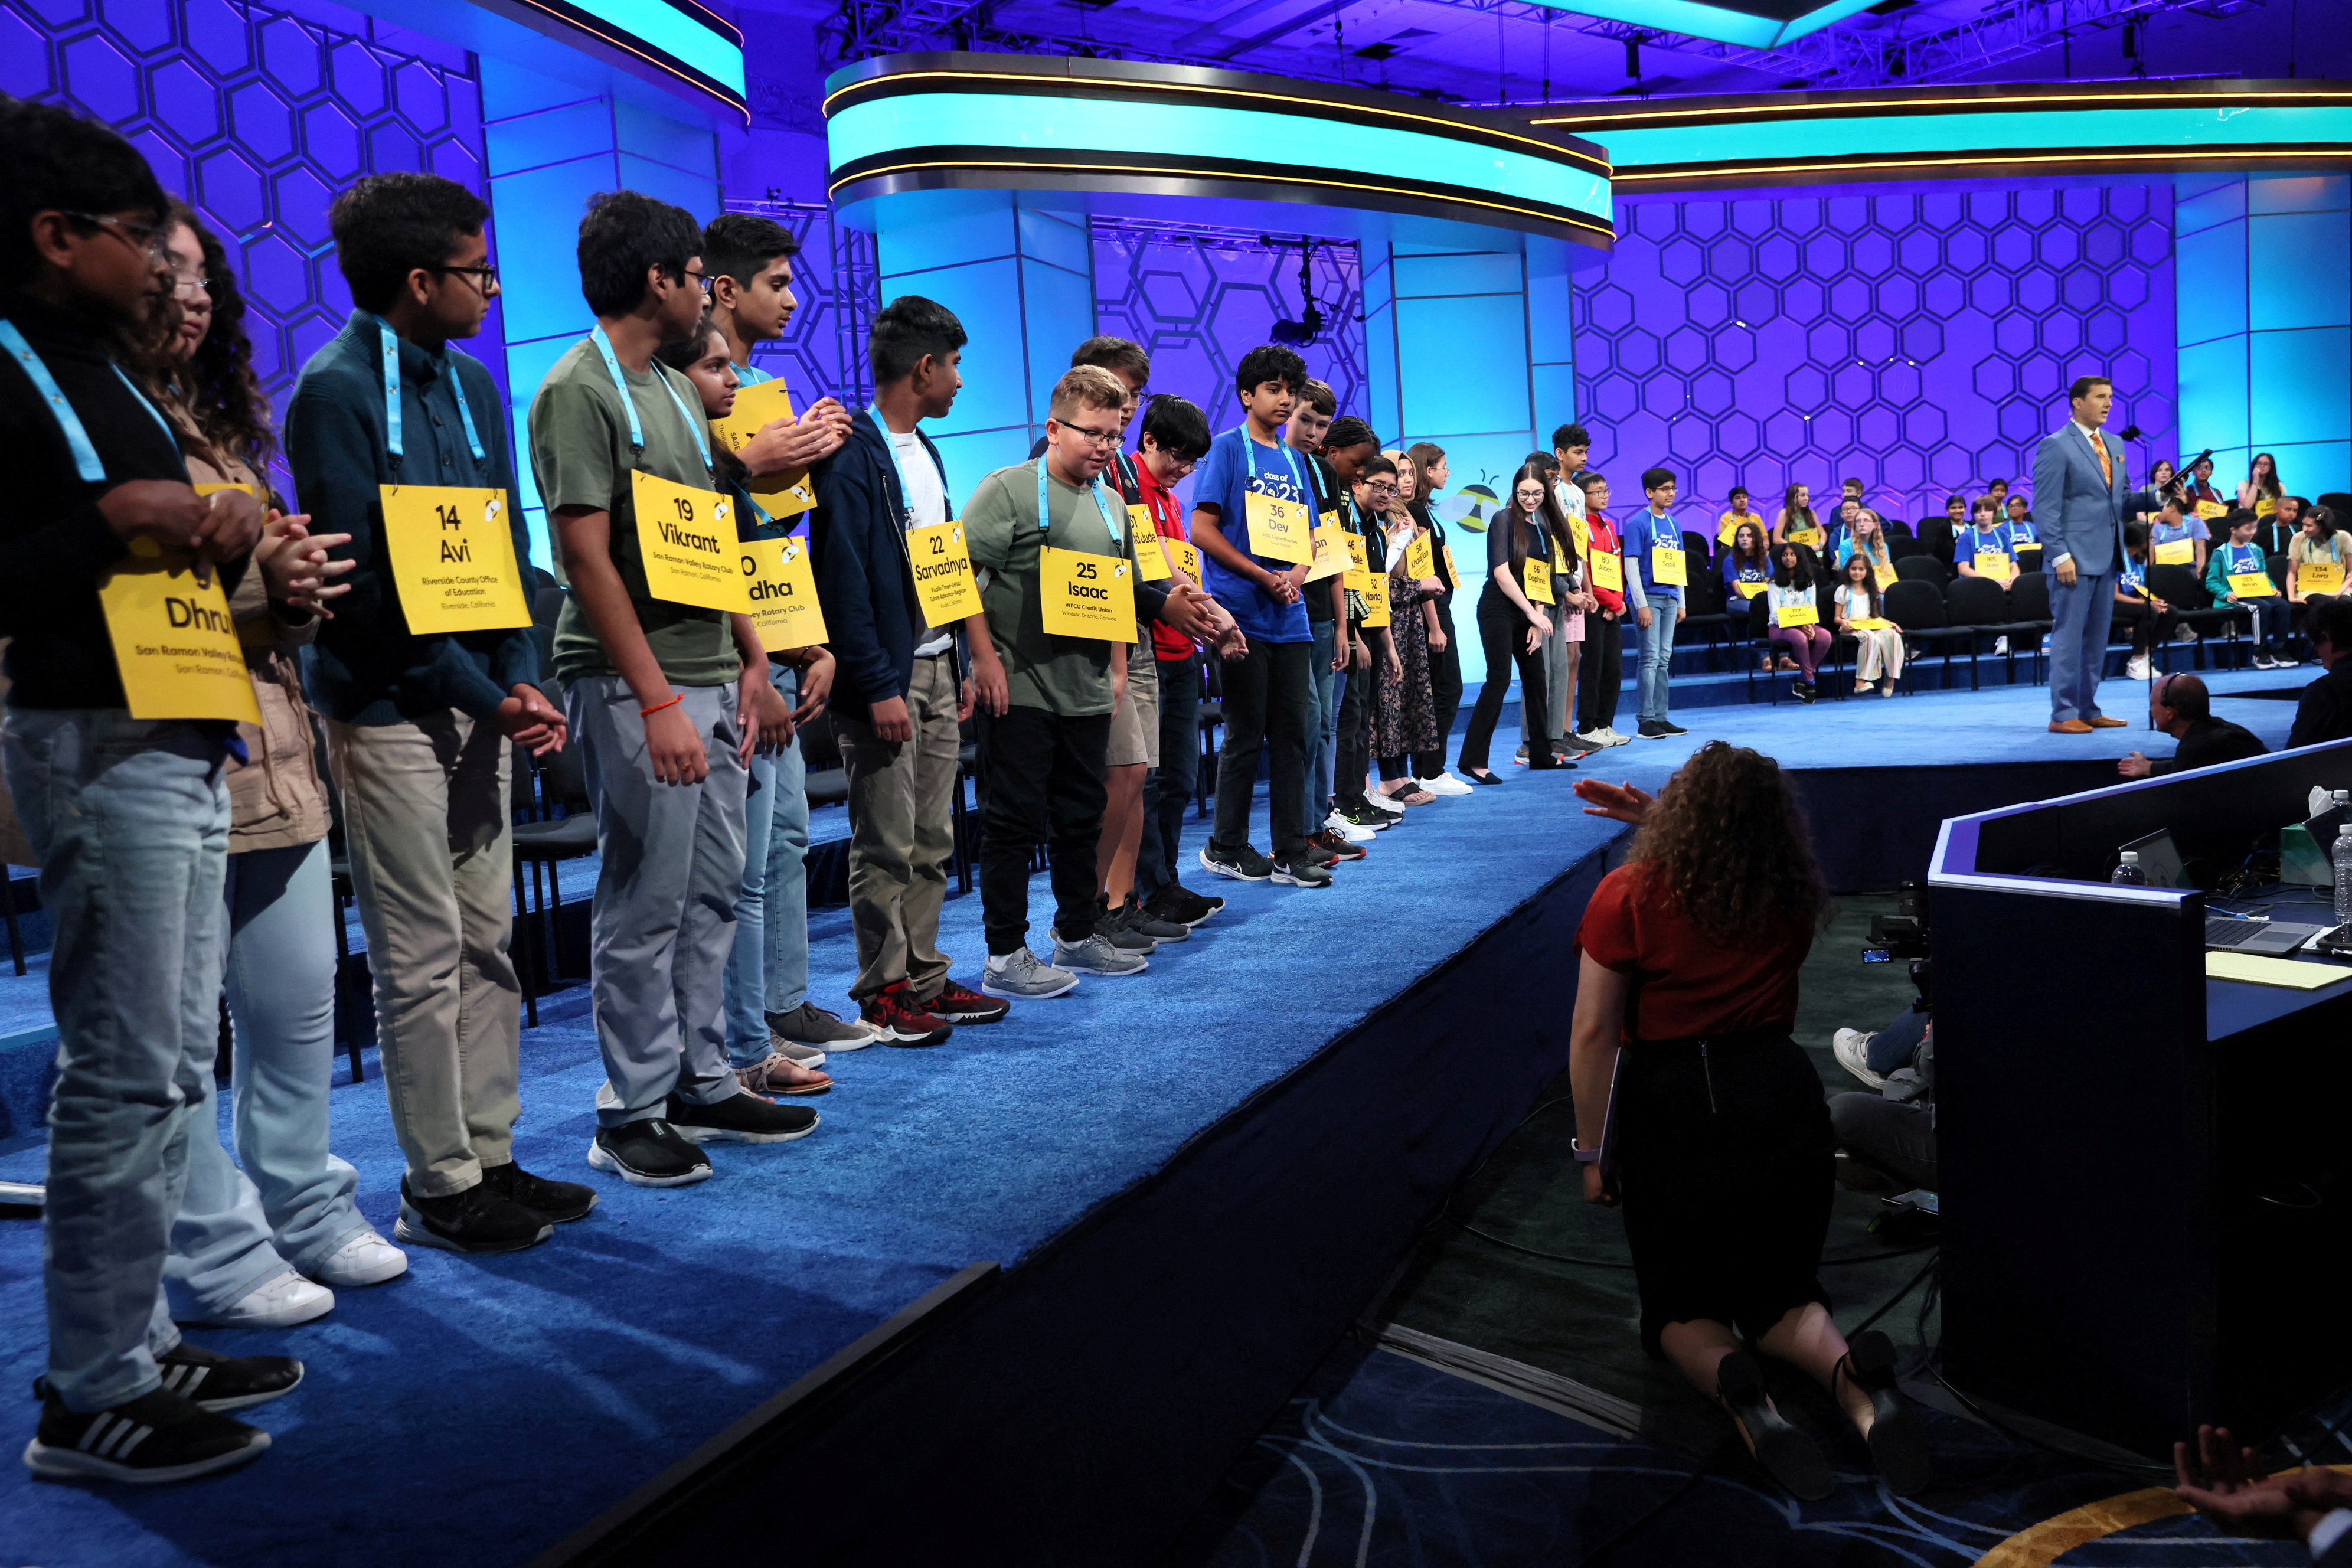 Scenes from the National Spelling Bee in National Harbor, U.S